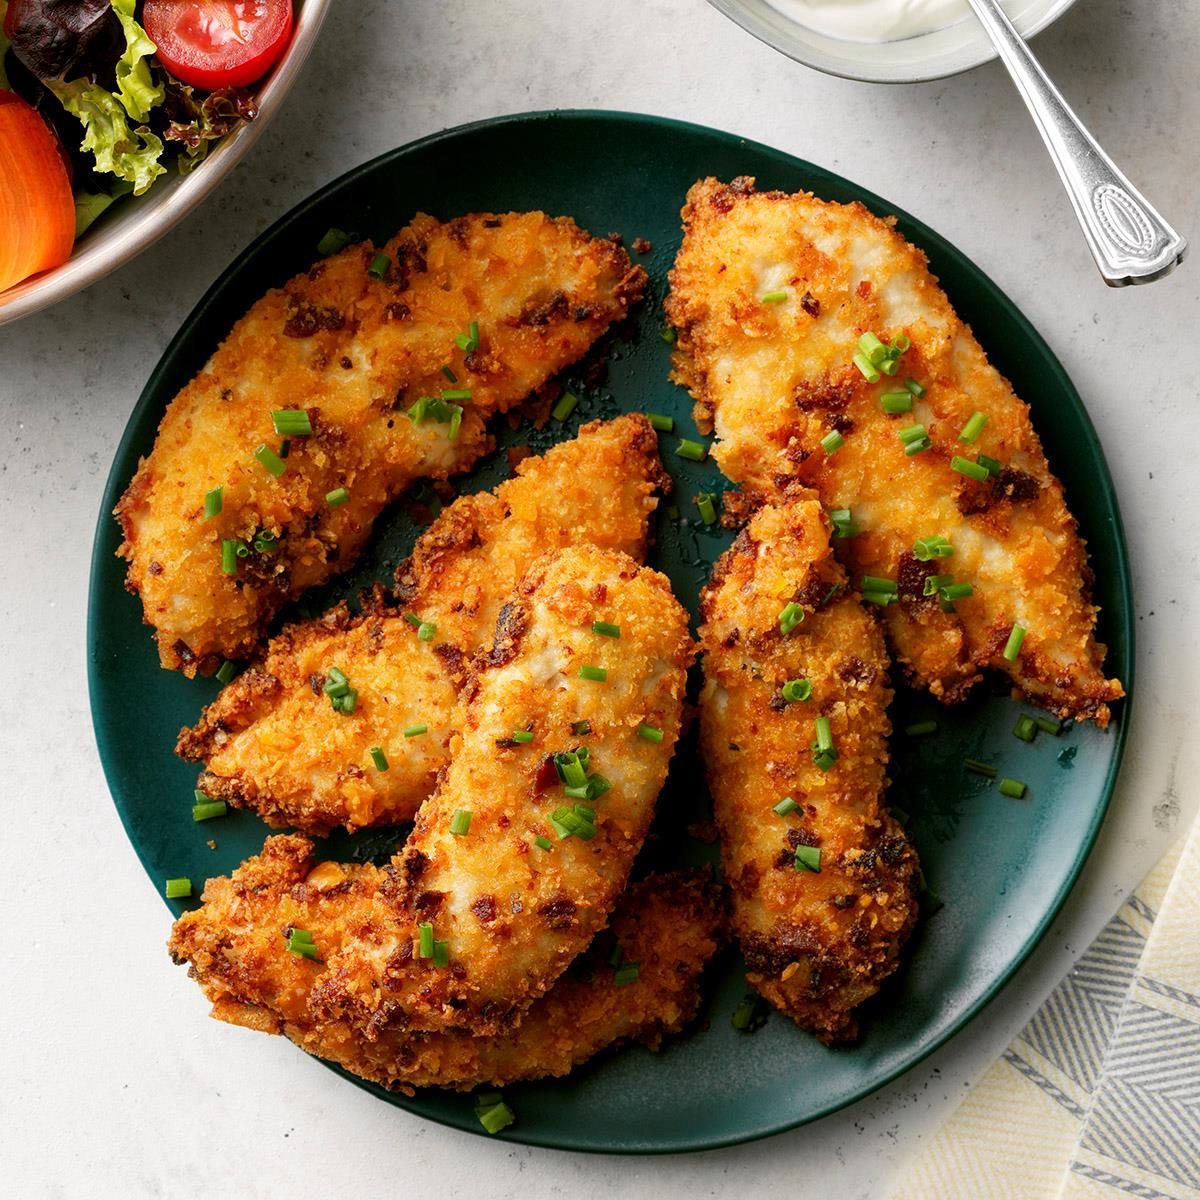 Make These SIMPLE, 15-Minute Air Fryer Ideas Kids LOVE!